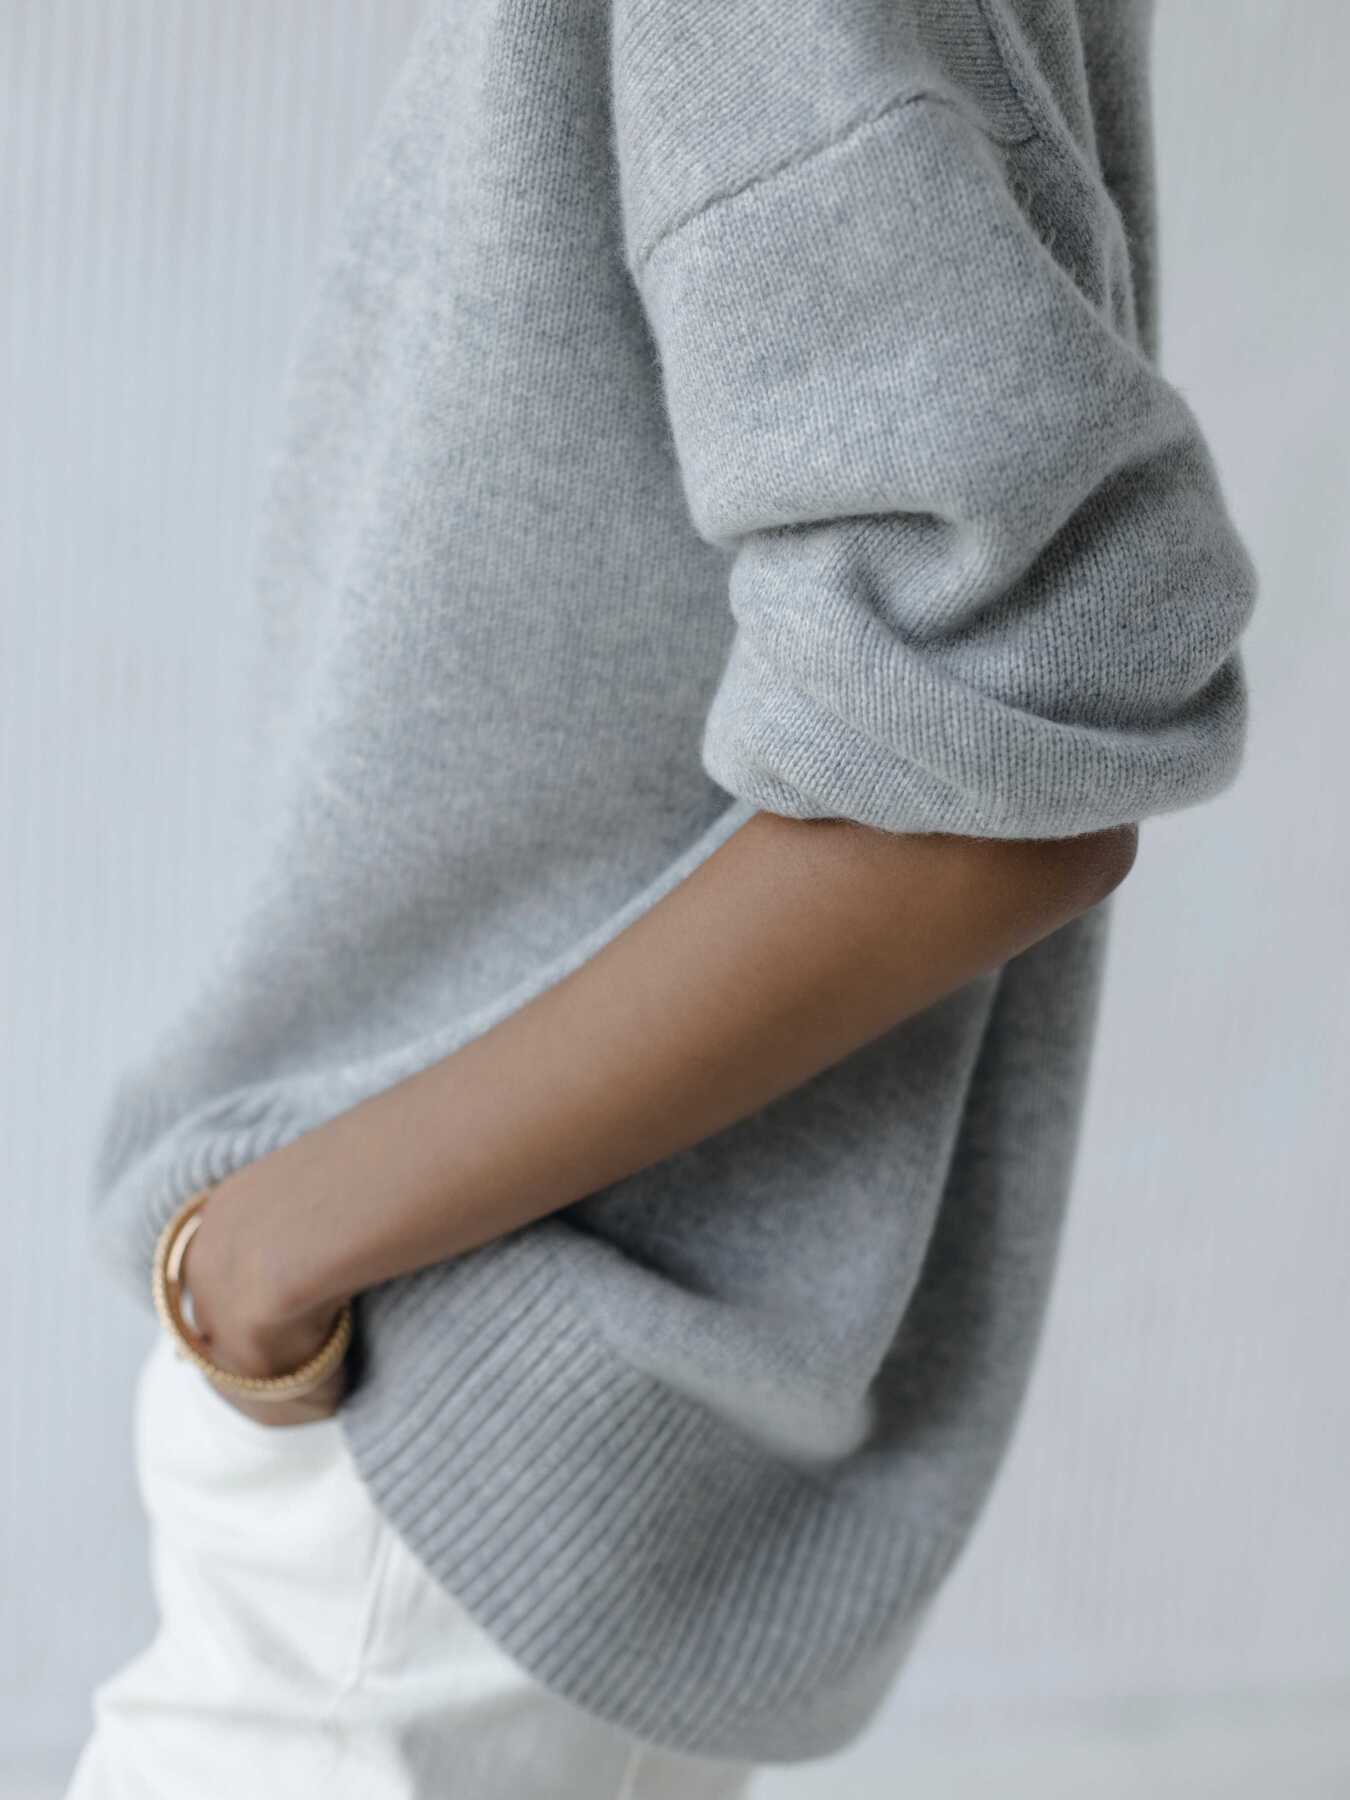 PEARL GREY PULLOVER